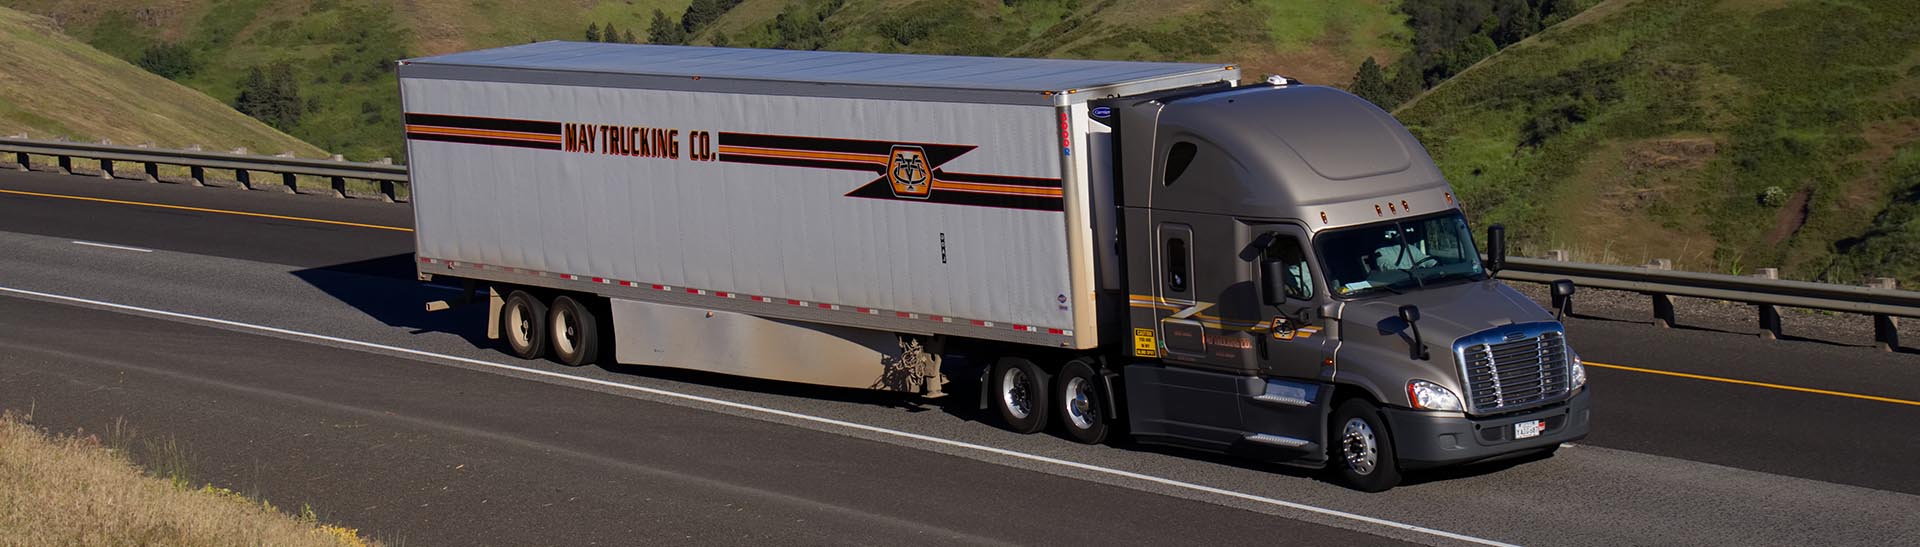 Louisburg Trucking Company, Freight Forwarding Services and Logistics Services